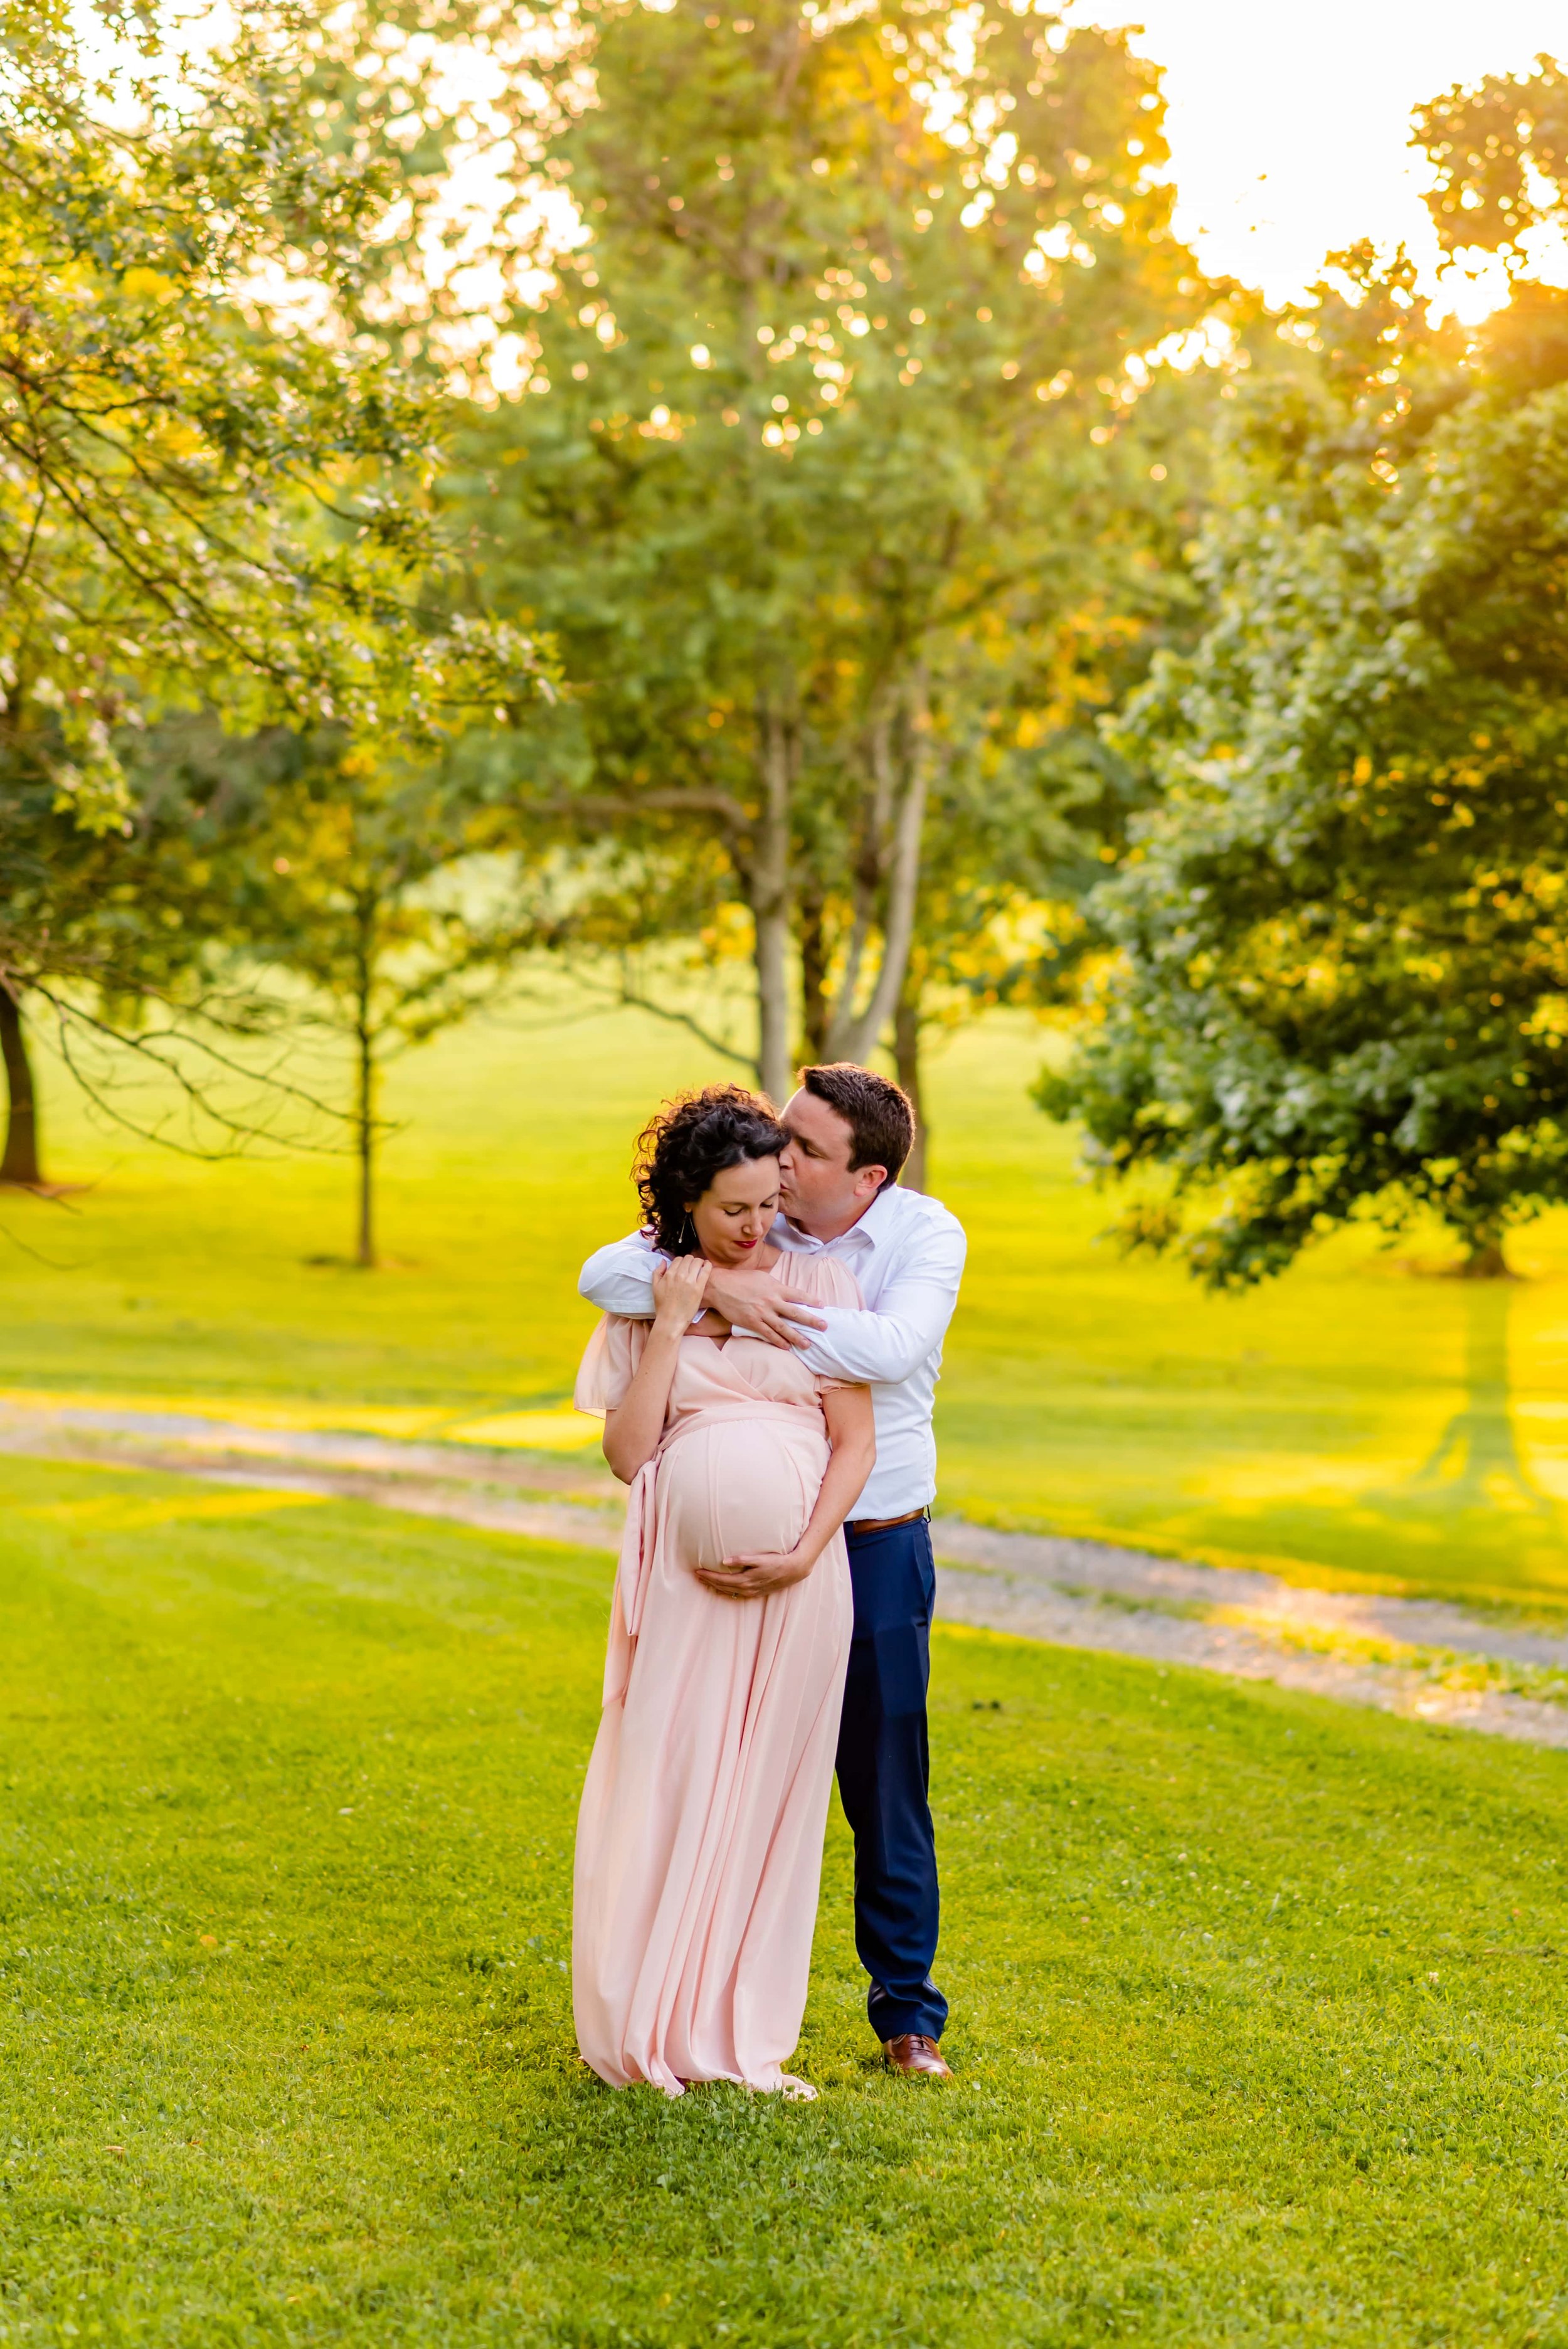 Maryland Maternity Photo of Man and Woman at Sunset both holding onto her belly